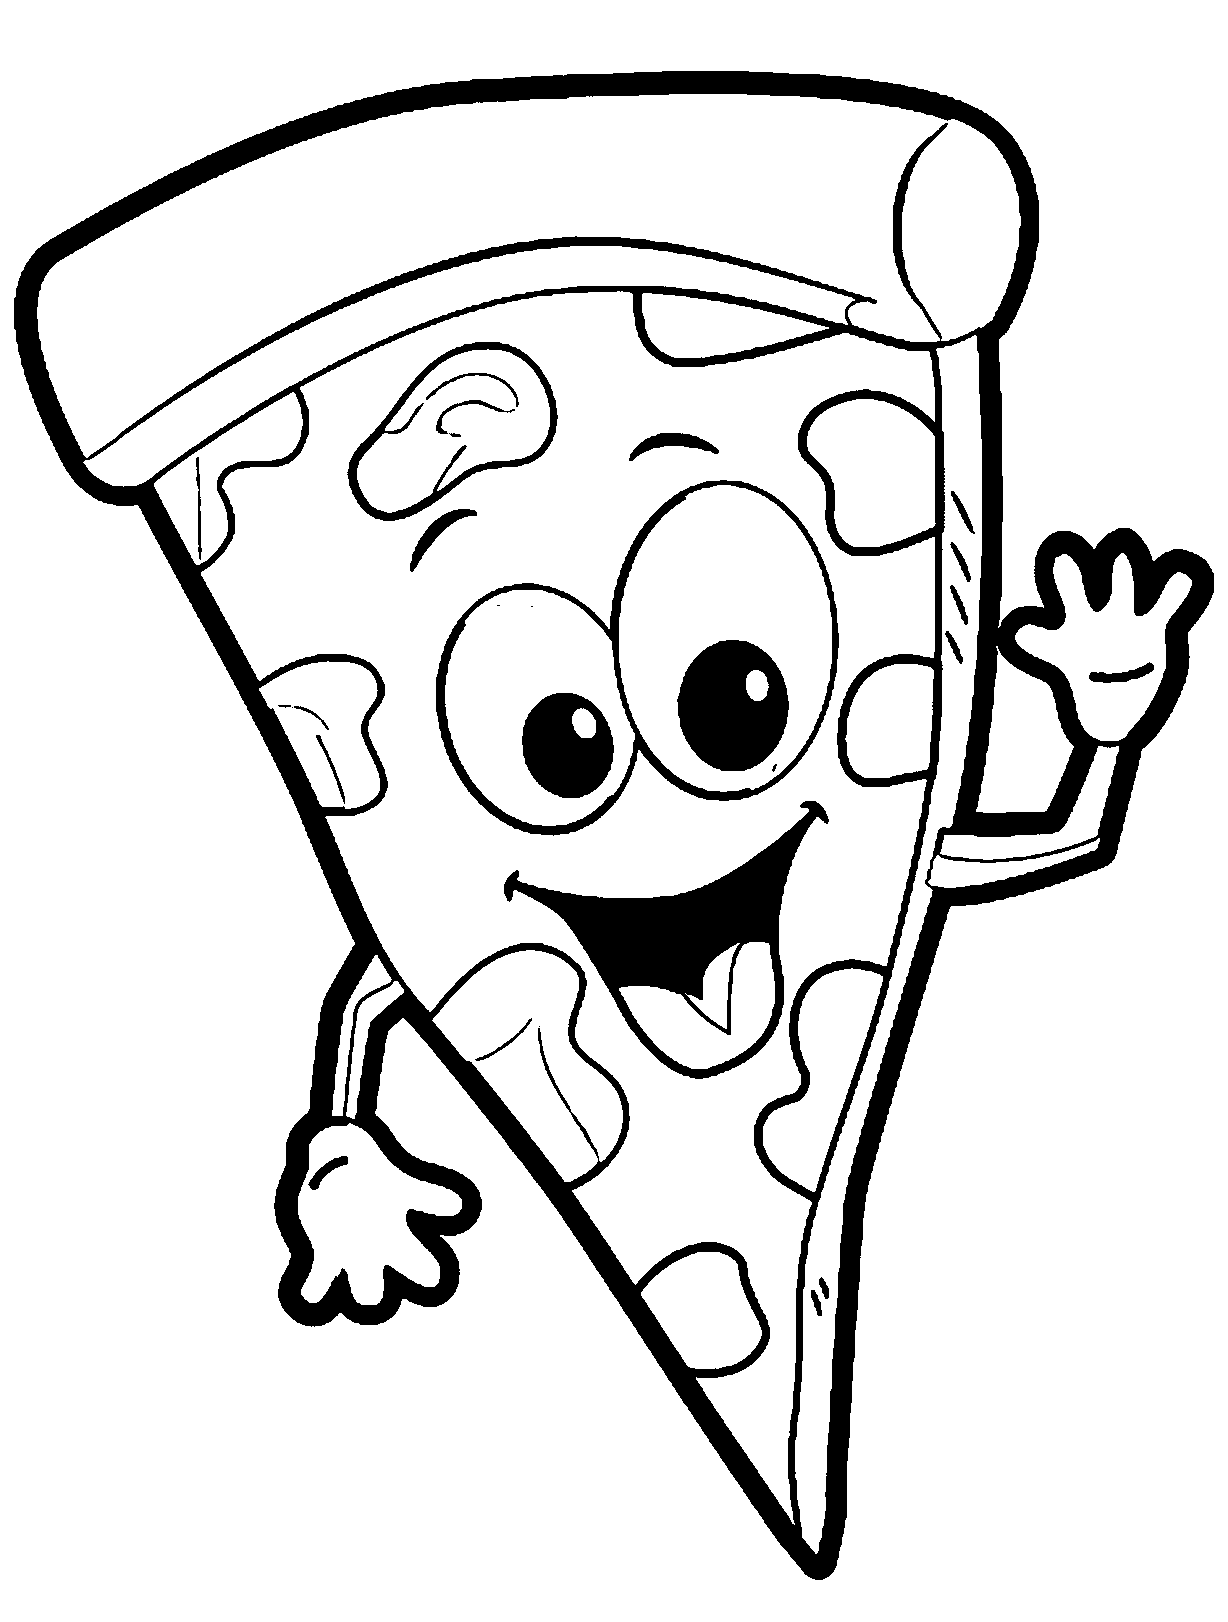 Pizza Coloring Pages Wecoloringpage Shopkins Colouring Pages Kids Printable Coloring